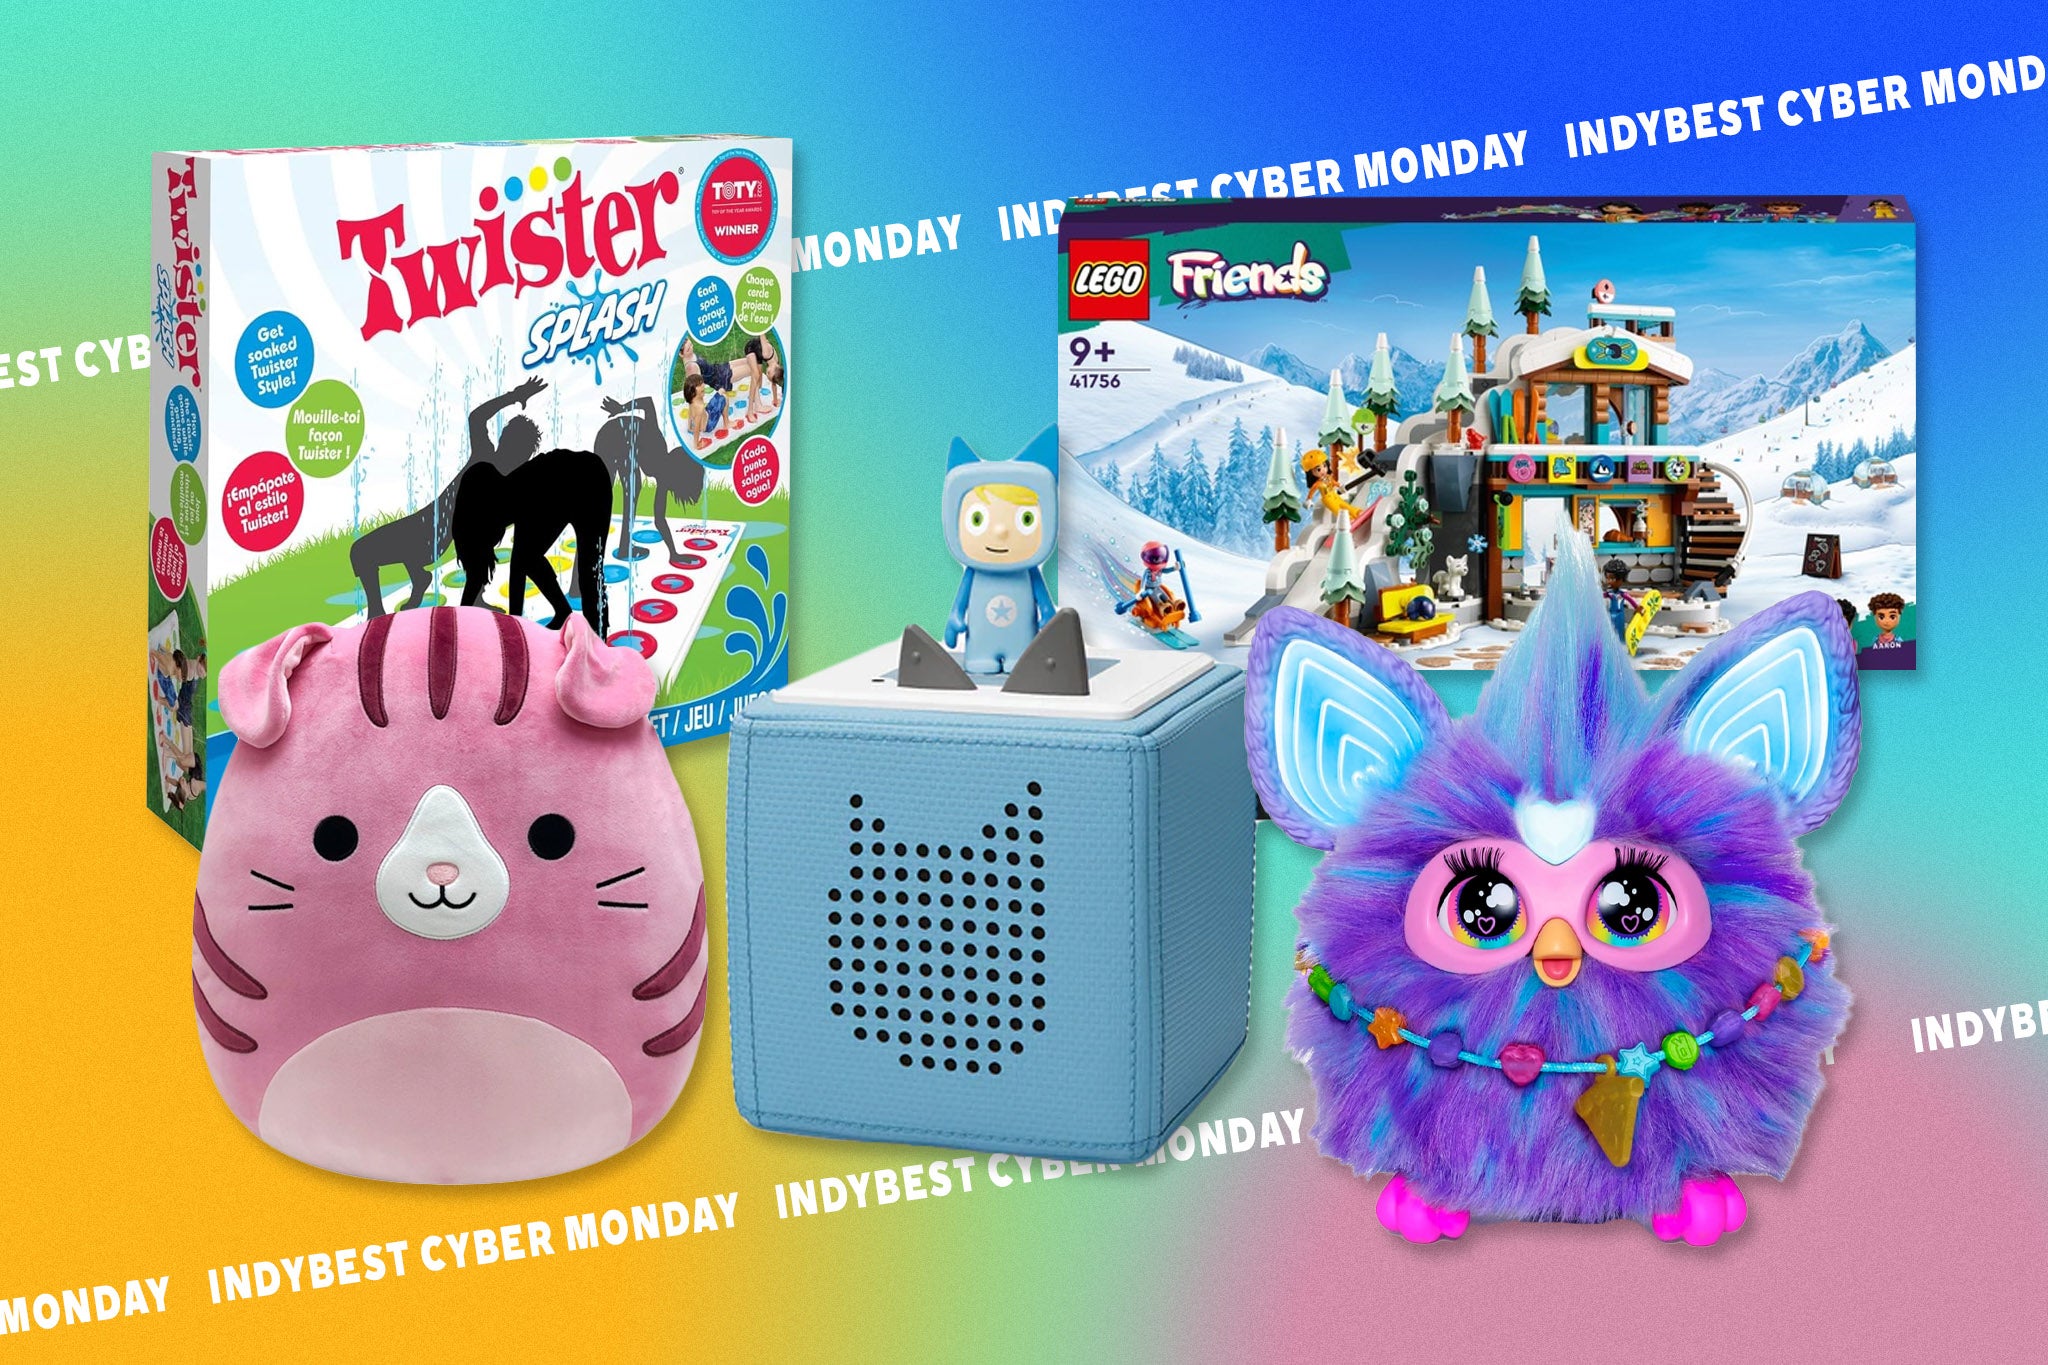 70+ Best Cyber Monday Toy Deals Up to 70% Off